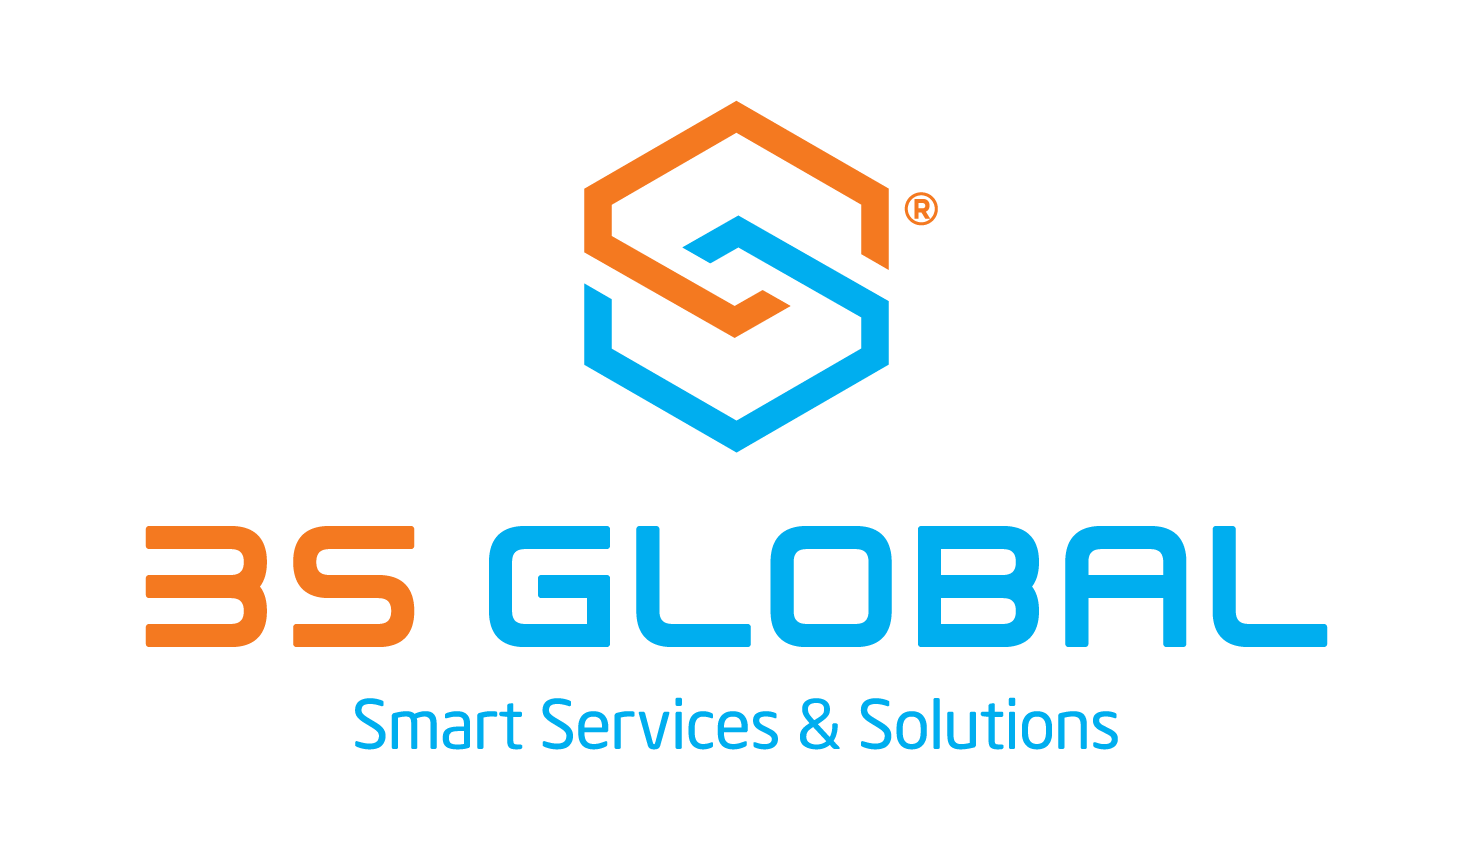 3SG – Smart Services & Solutions